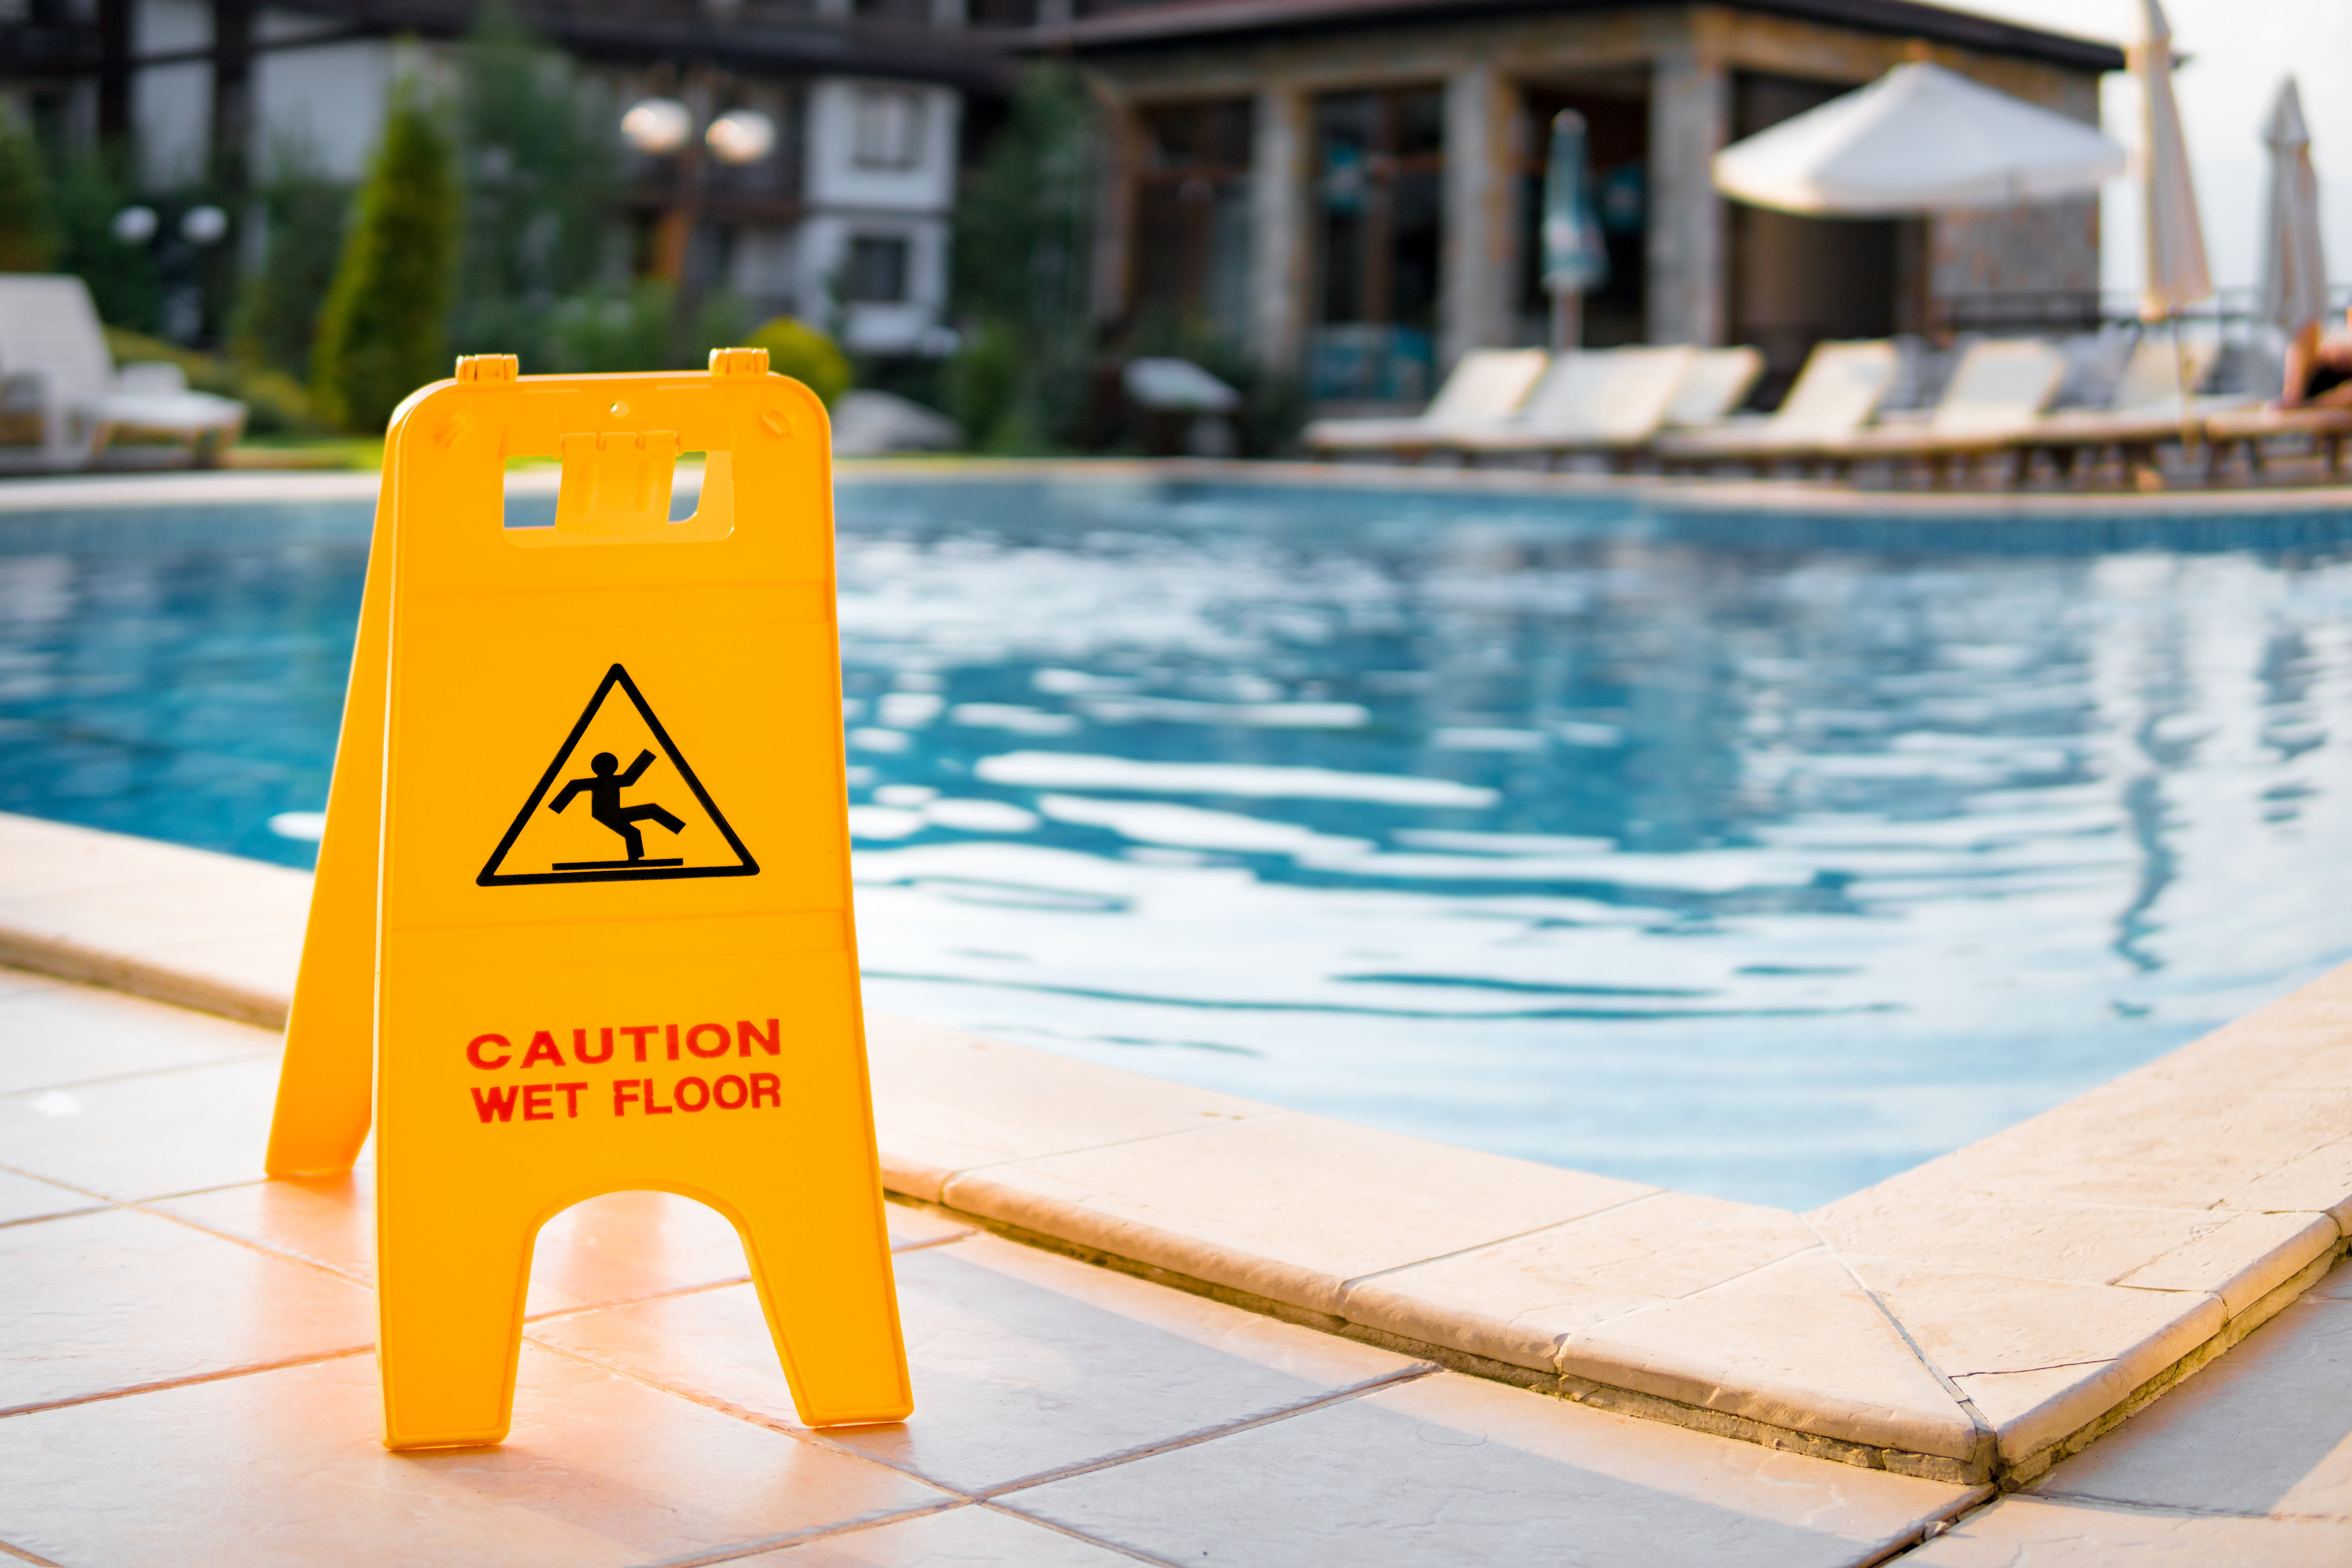 Can I File a Claim for An Injury at A Swimming Pool?